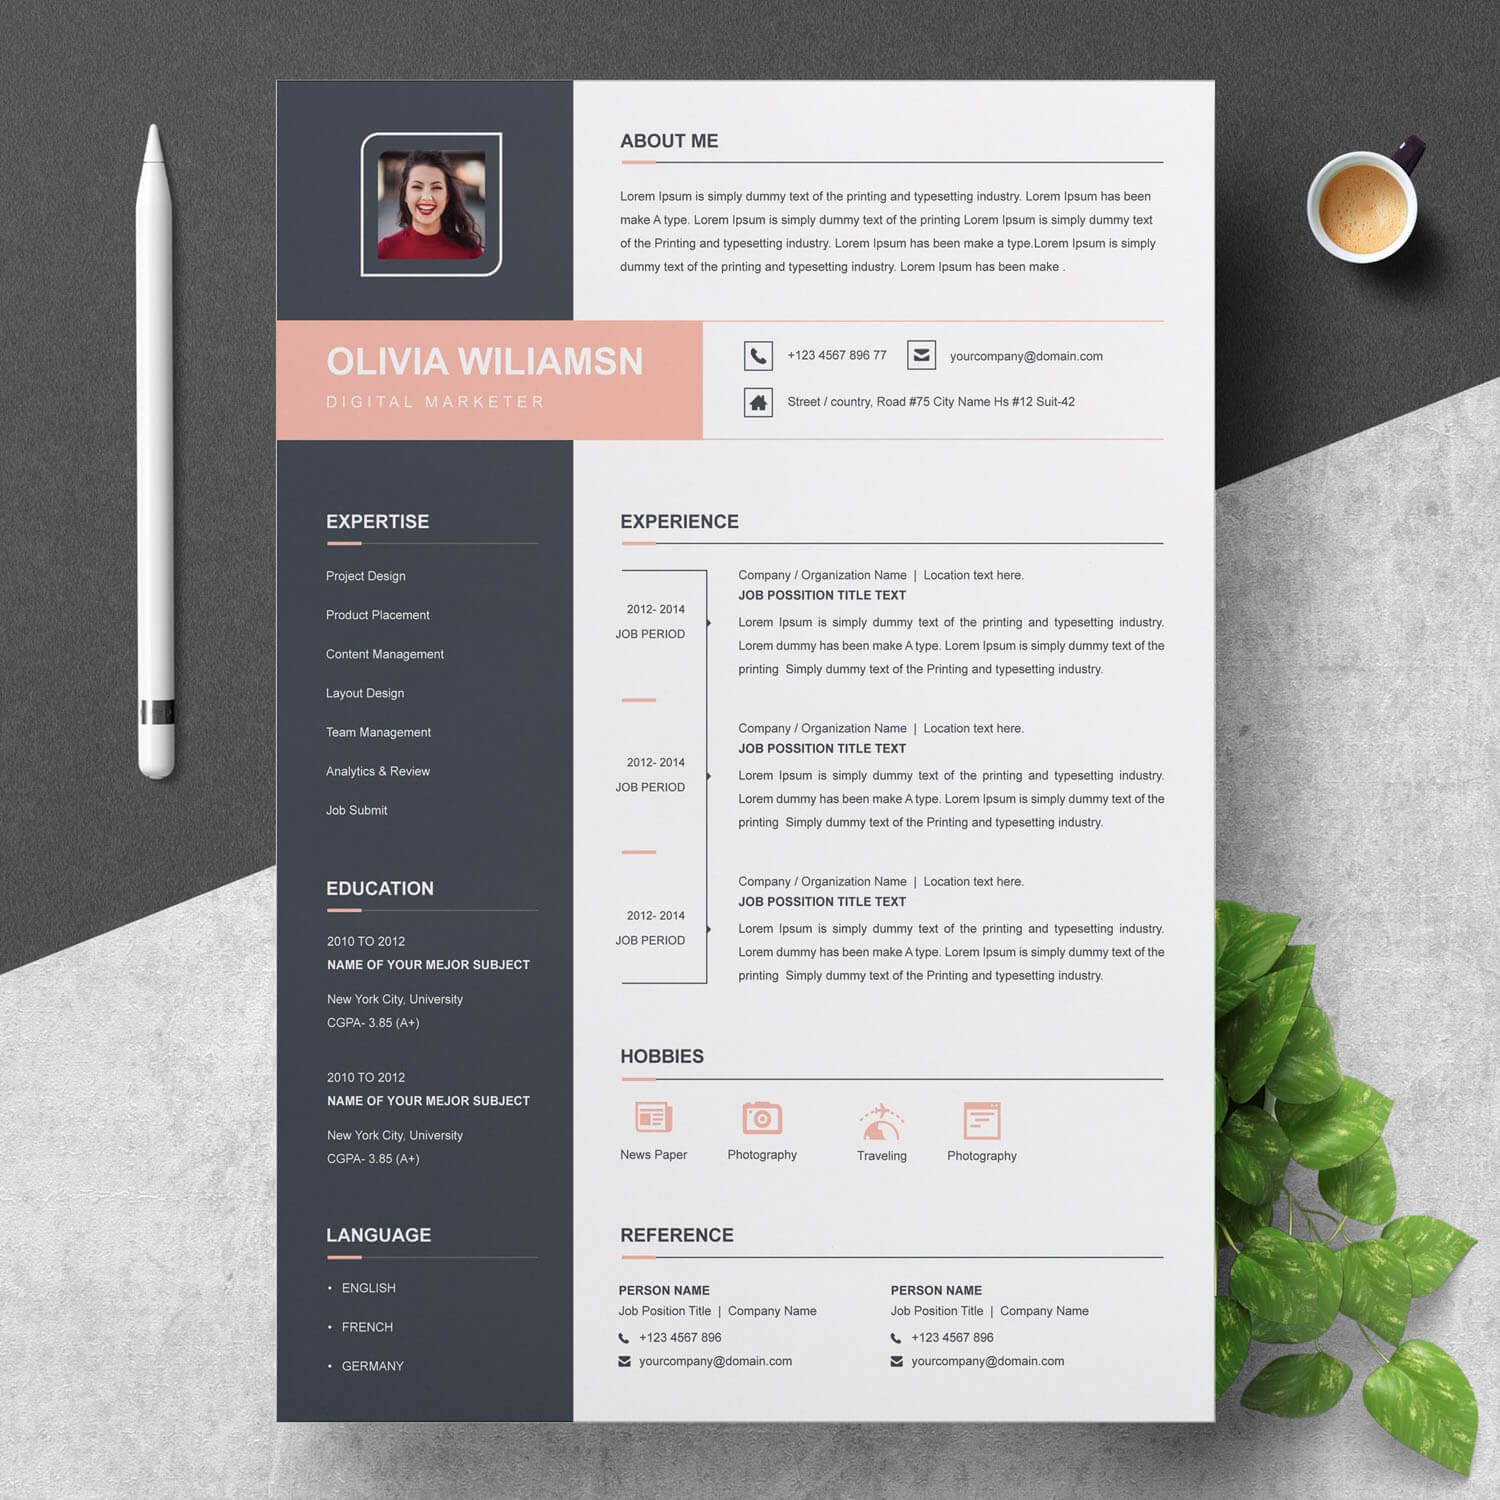 Free Resume Templates for Marketing Manager Marketing Manager Resume Template 2021 – Resumeinventor